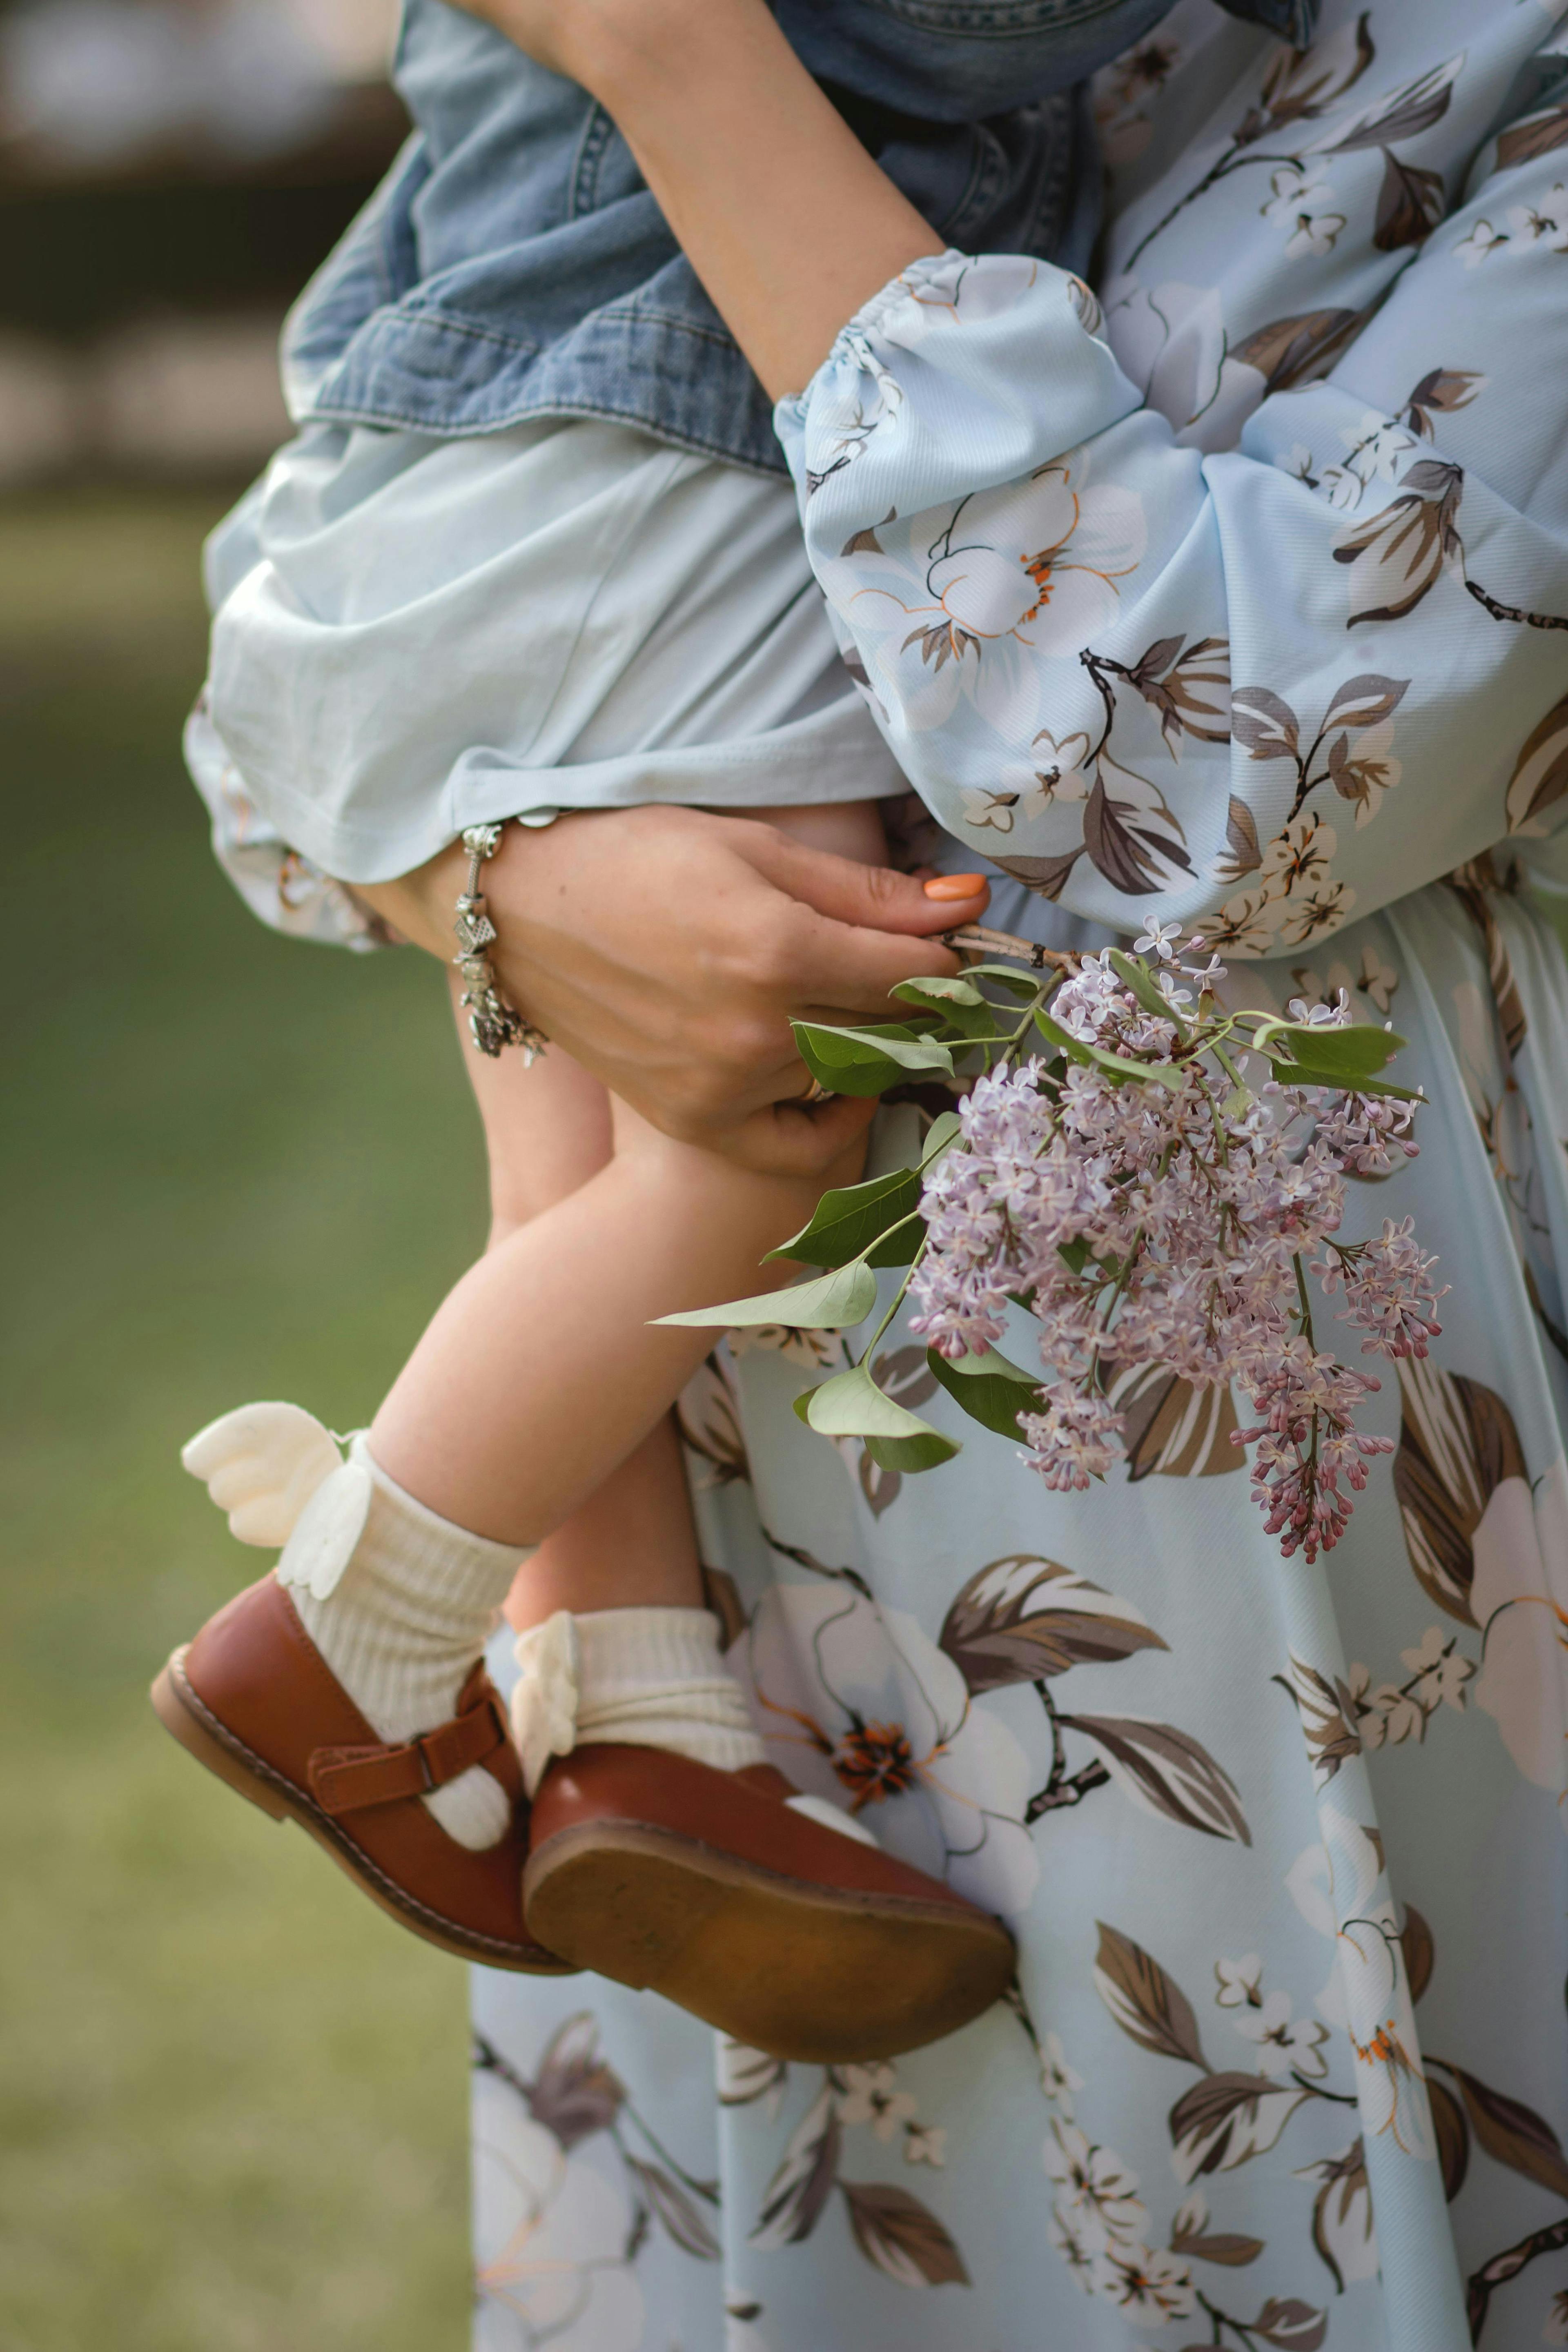 A mother carrying her baby while wearing a fashionable summer dress. 